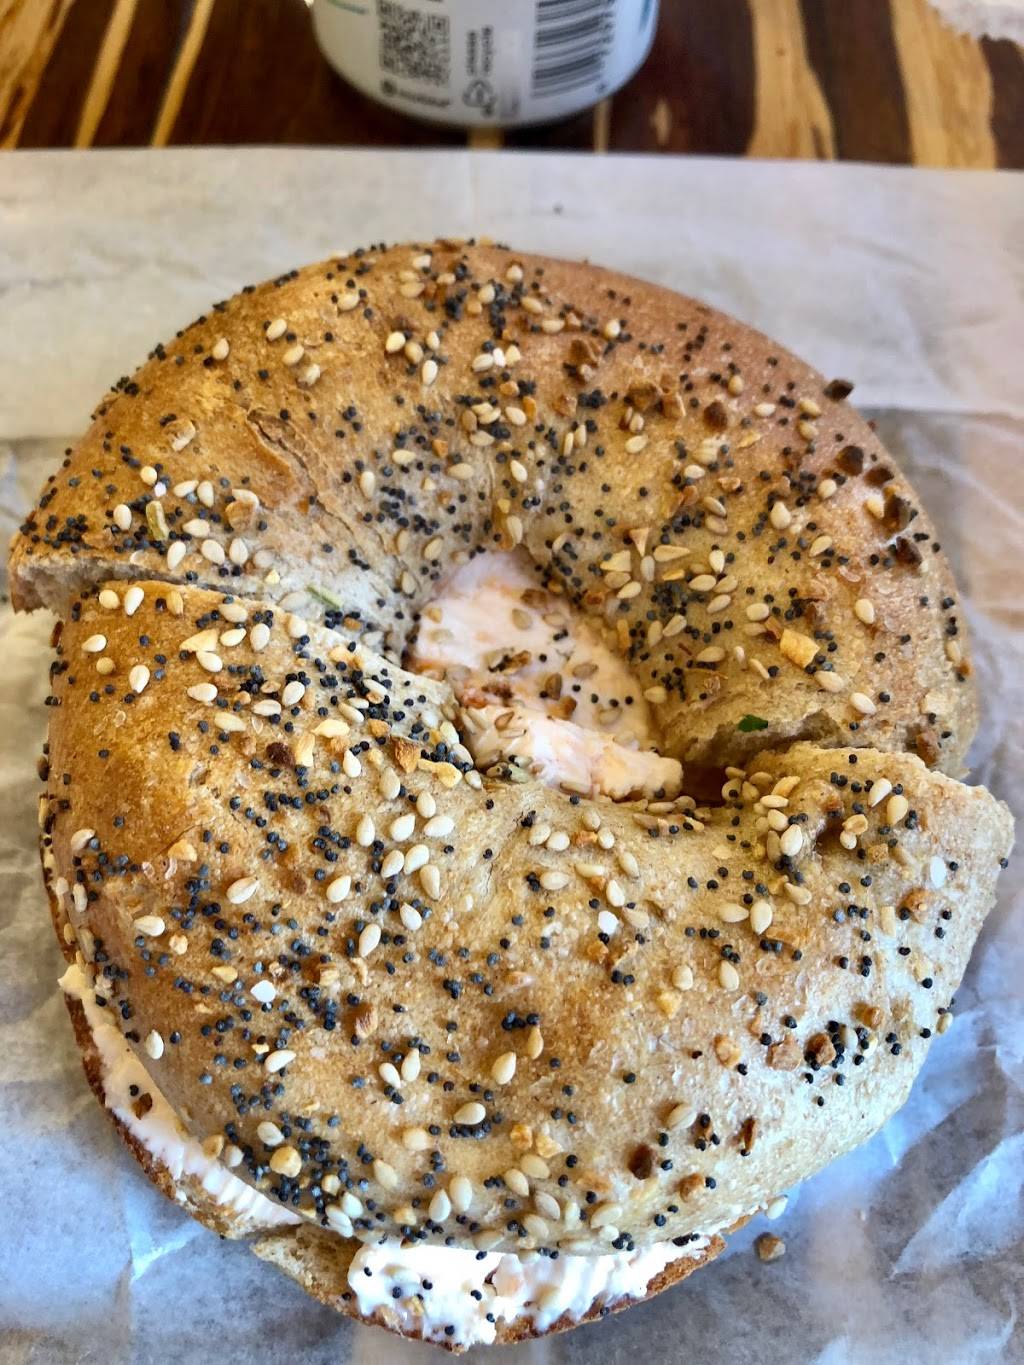 Tal Bagels | bakery | 333 East 86th St #1, New York, NY 10028, USA | 2124276811 OR +1 212-427-6811